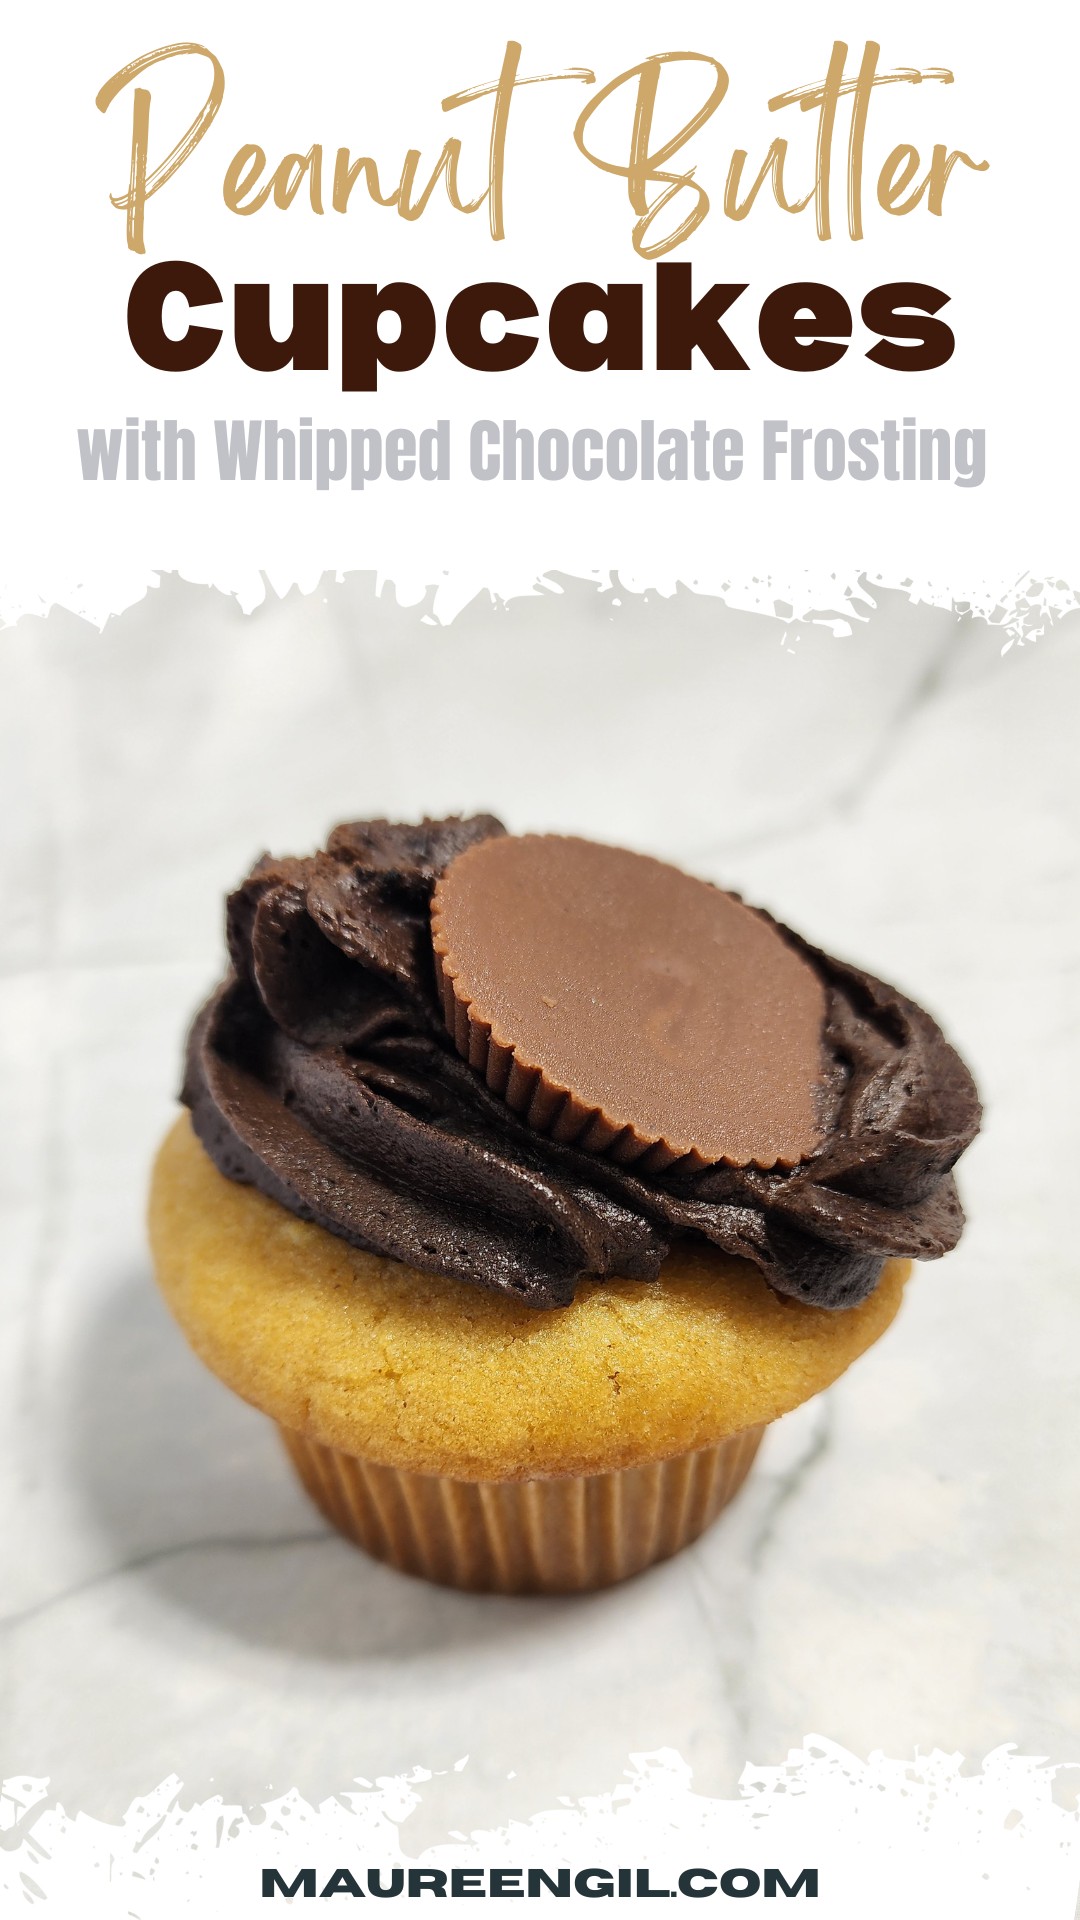 Reese's Peanut Butter Cupcakes: Irresistibly Delicious!